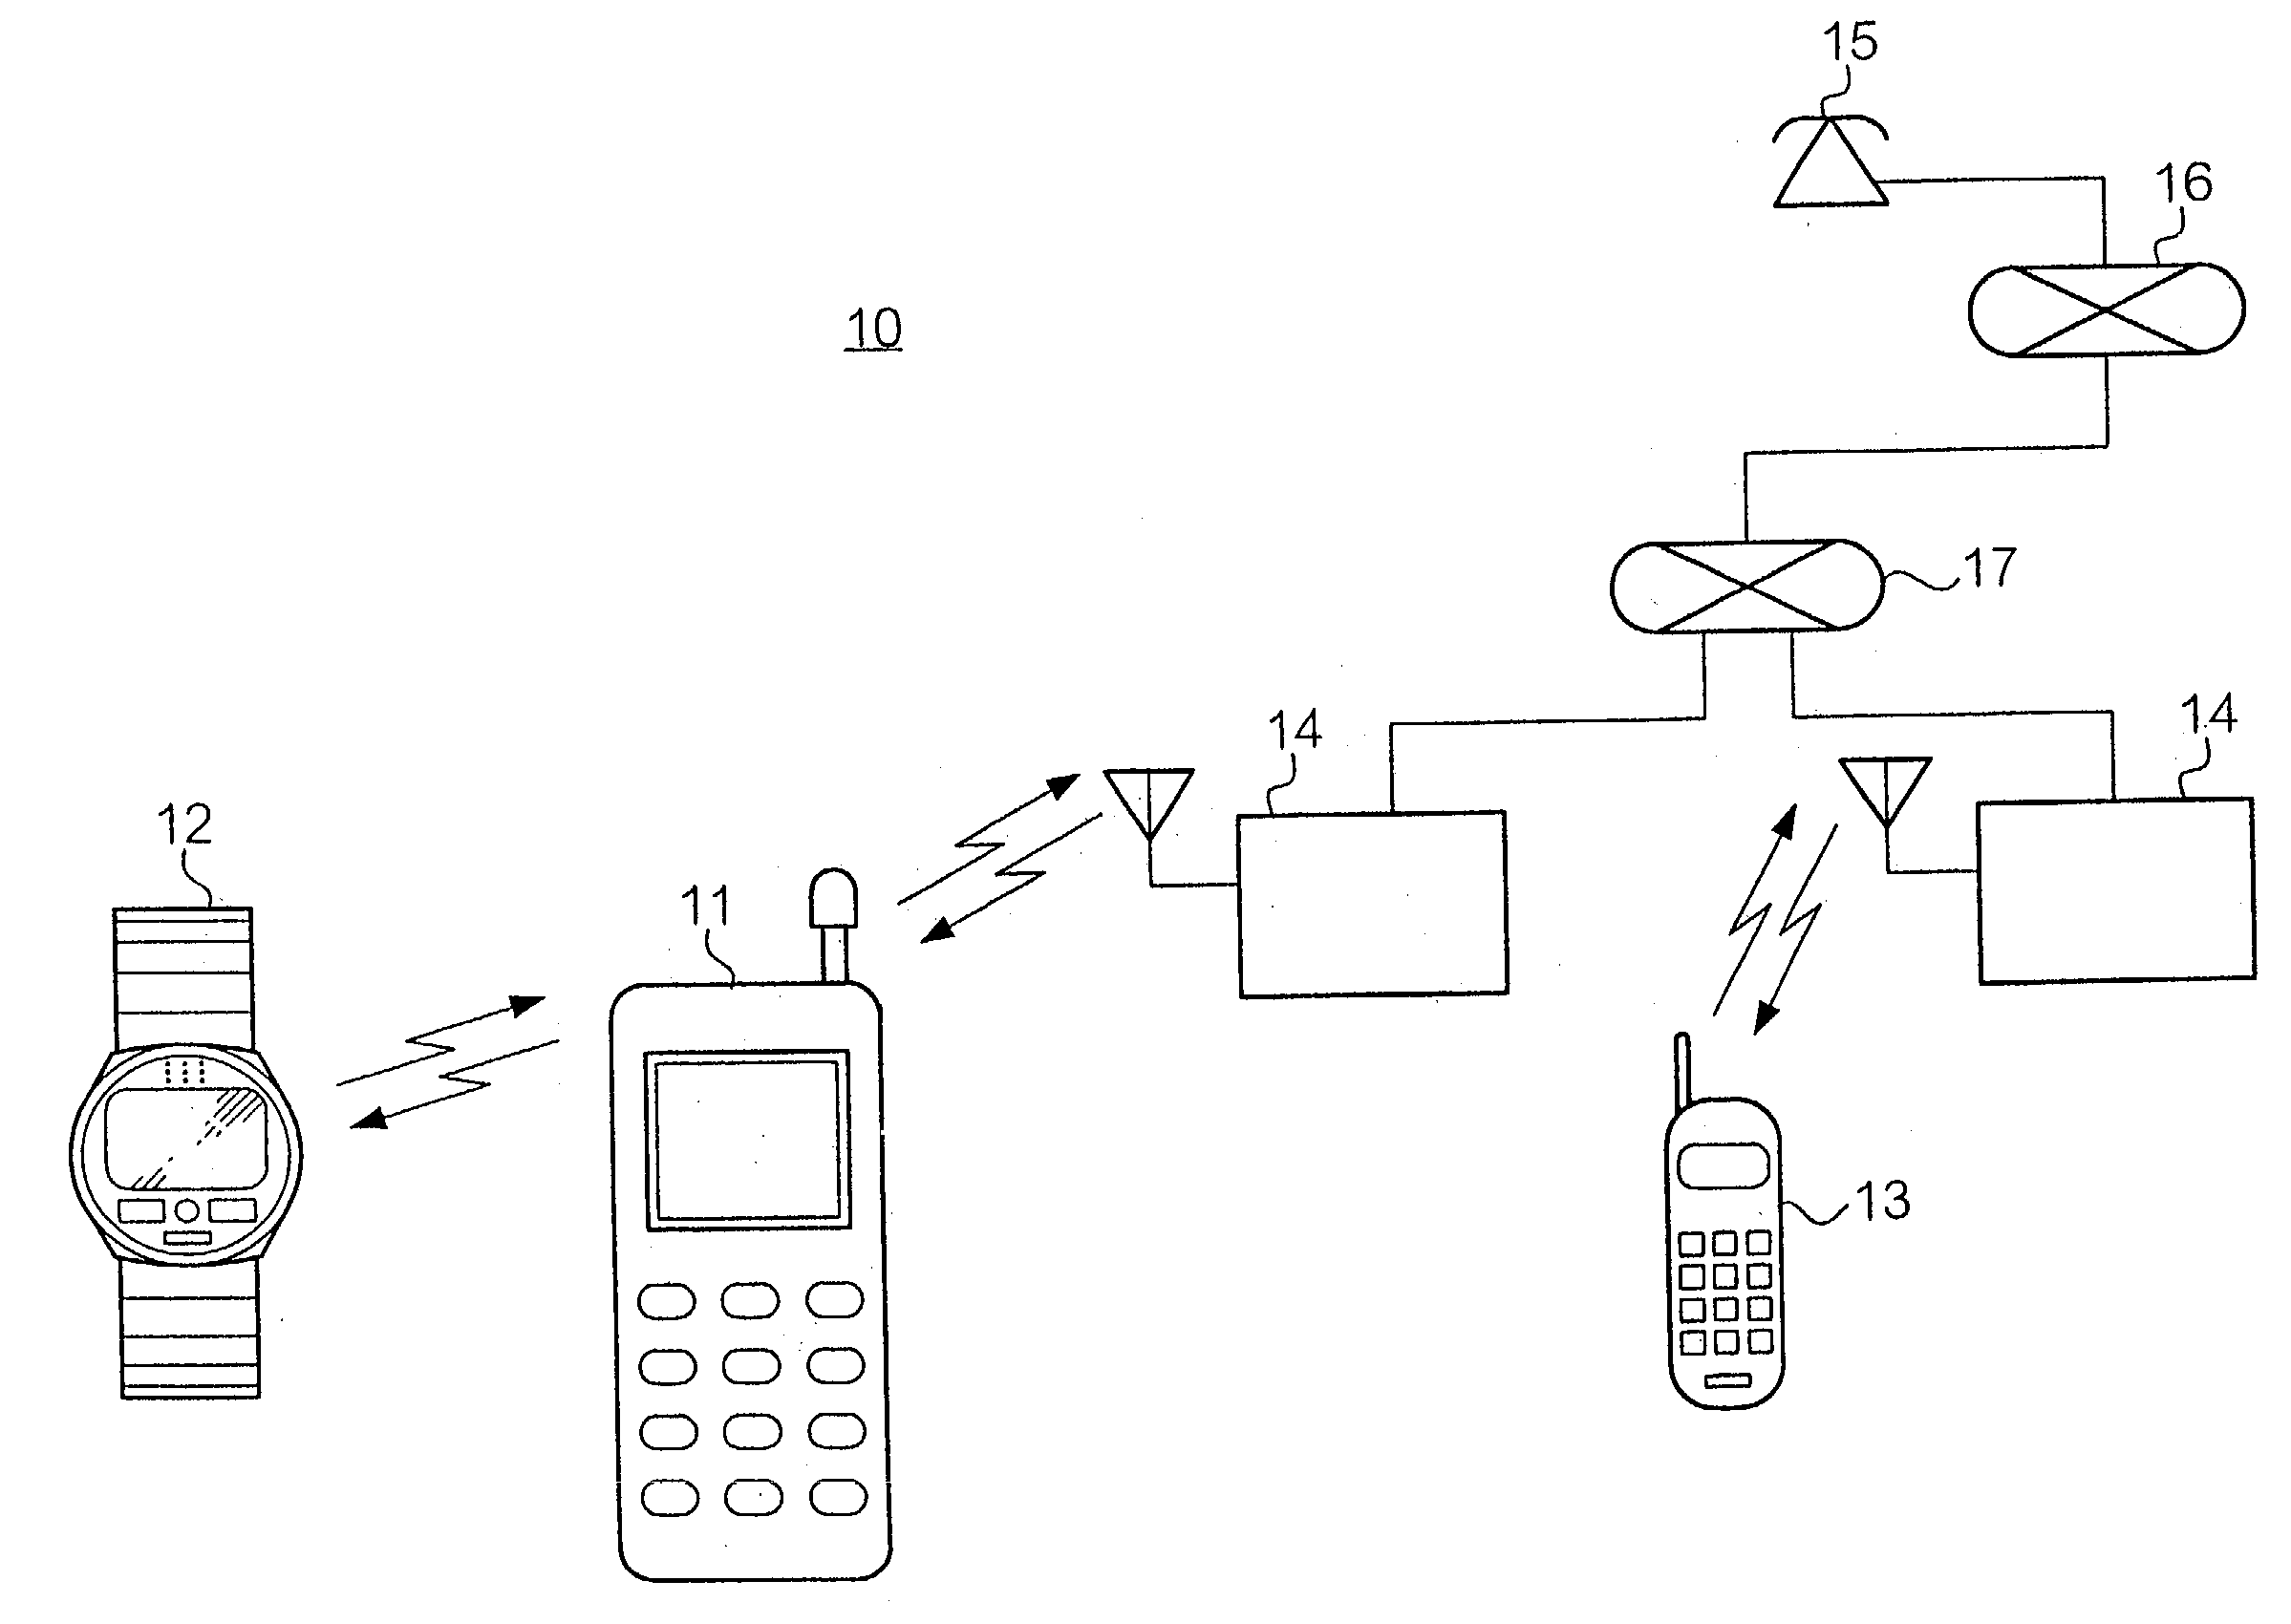 Mobile telephone and radio communication device cooperatively processing incoming call